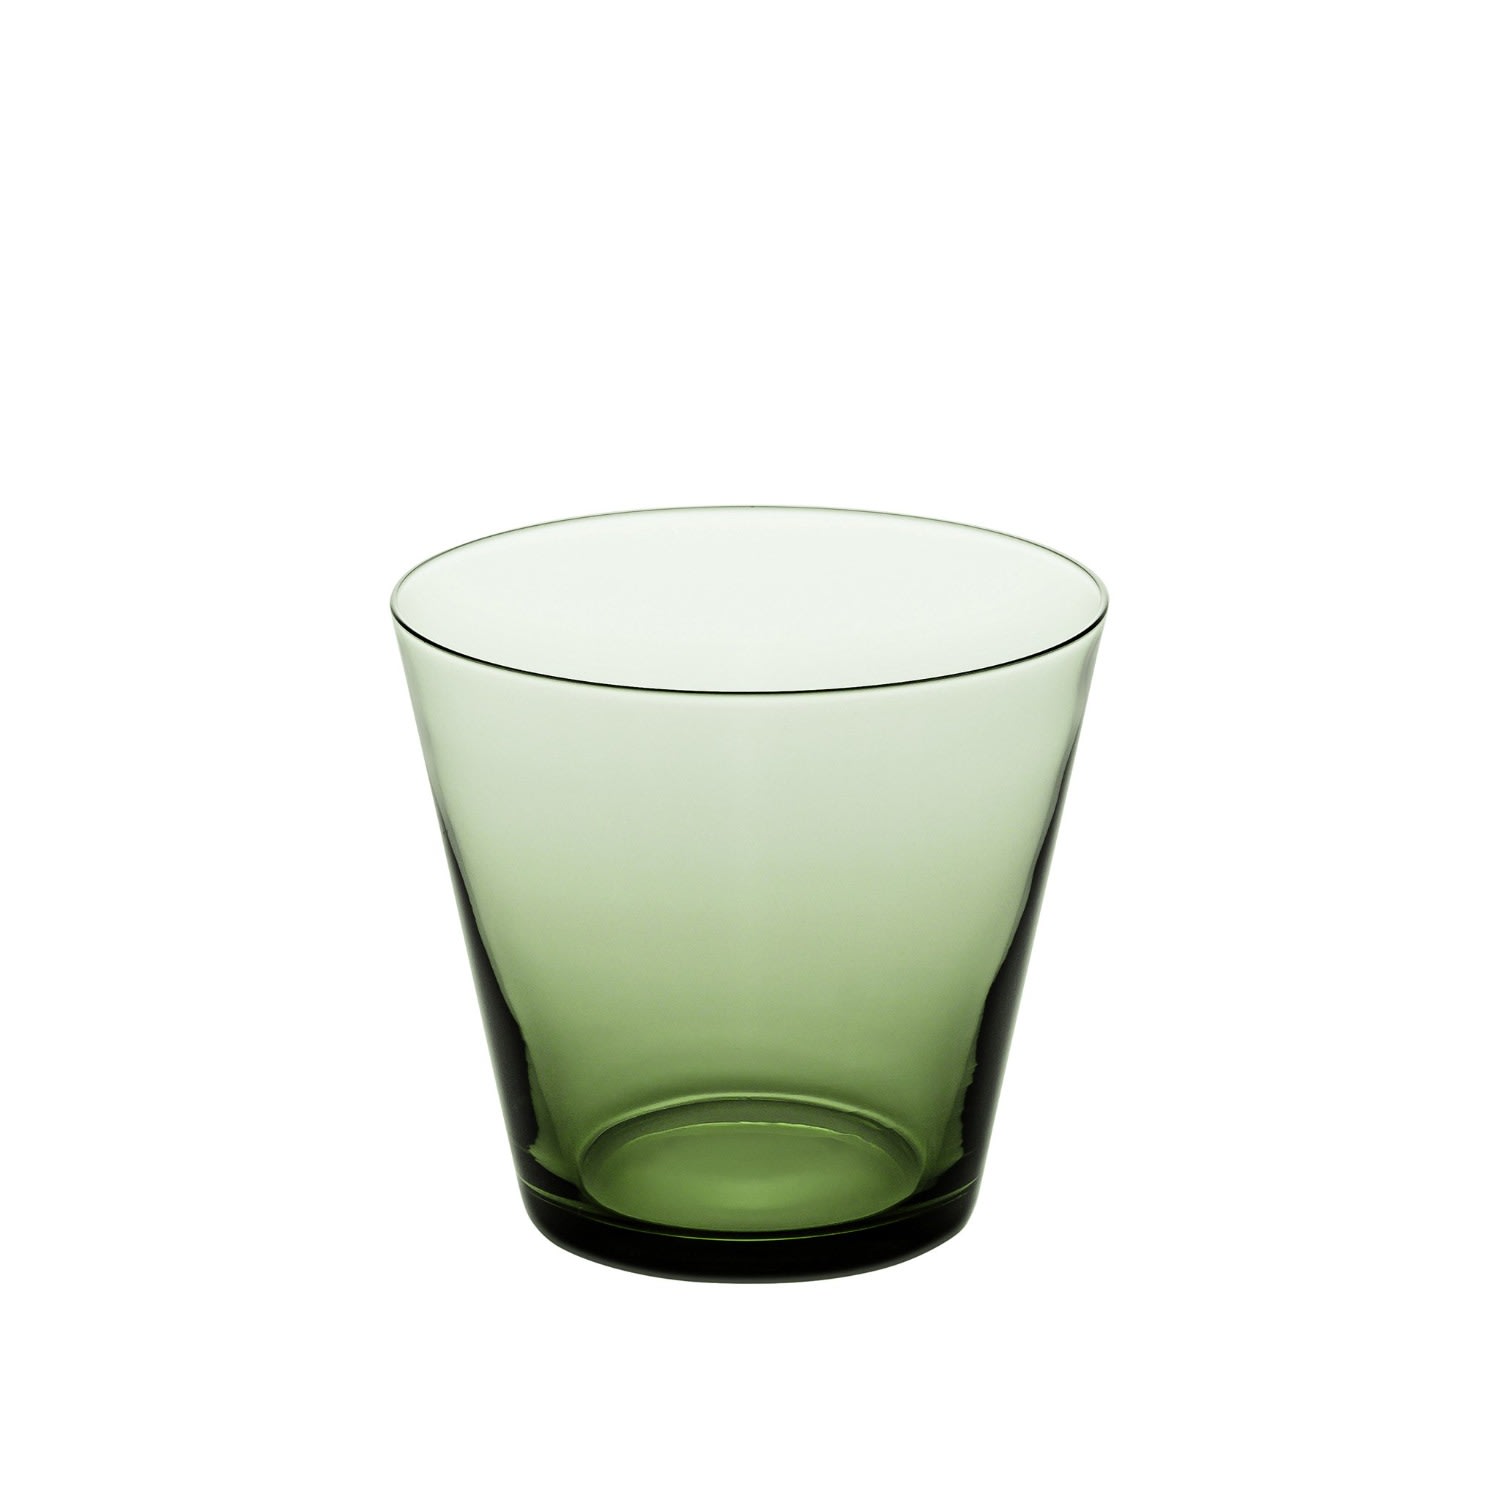 Sghr Sugahara Fifty's Handcrafted Old Fashioned Glass - Green